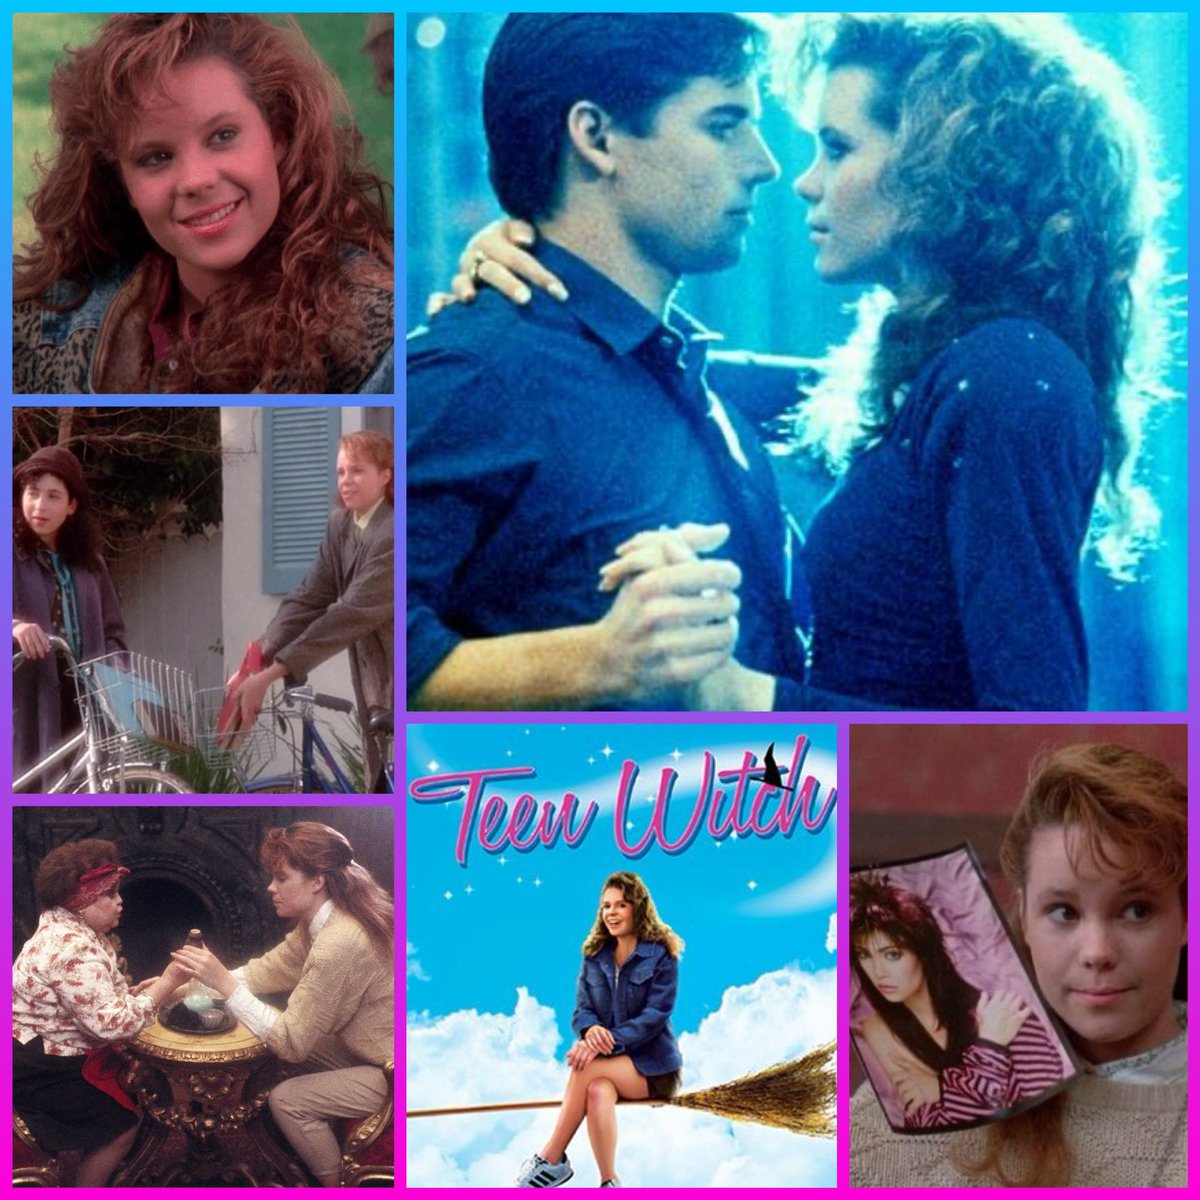 Happy 35th Anniversary?!

‘Teen Witch’ was released in theaters on this day in 1989.

#teenwitch #RobynLively #onthisdayinmoviehistory #80smoviesrock #zeldarubinstein #cultclassics #joshuamiller #80smoviesarethebest #transworldentertainment